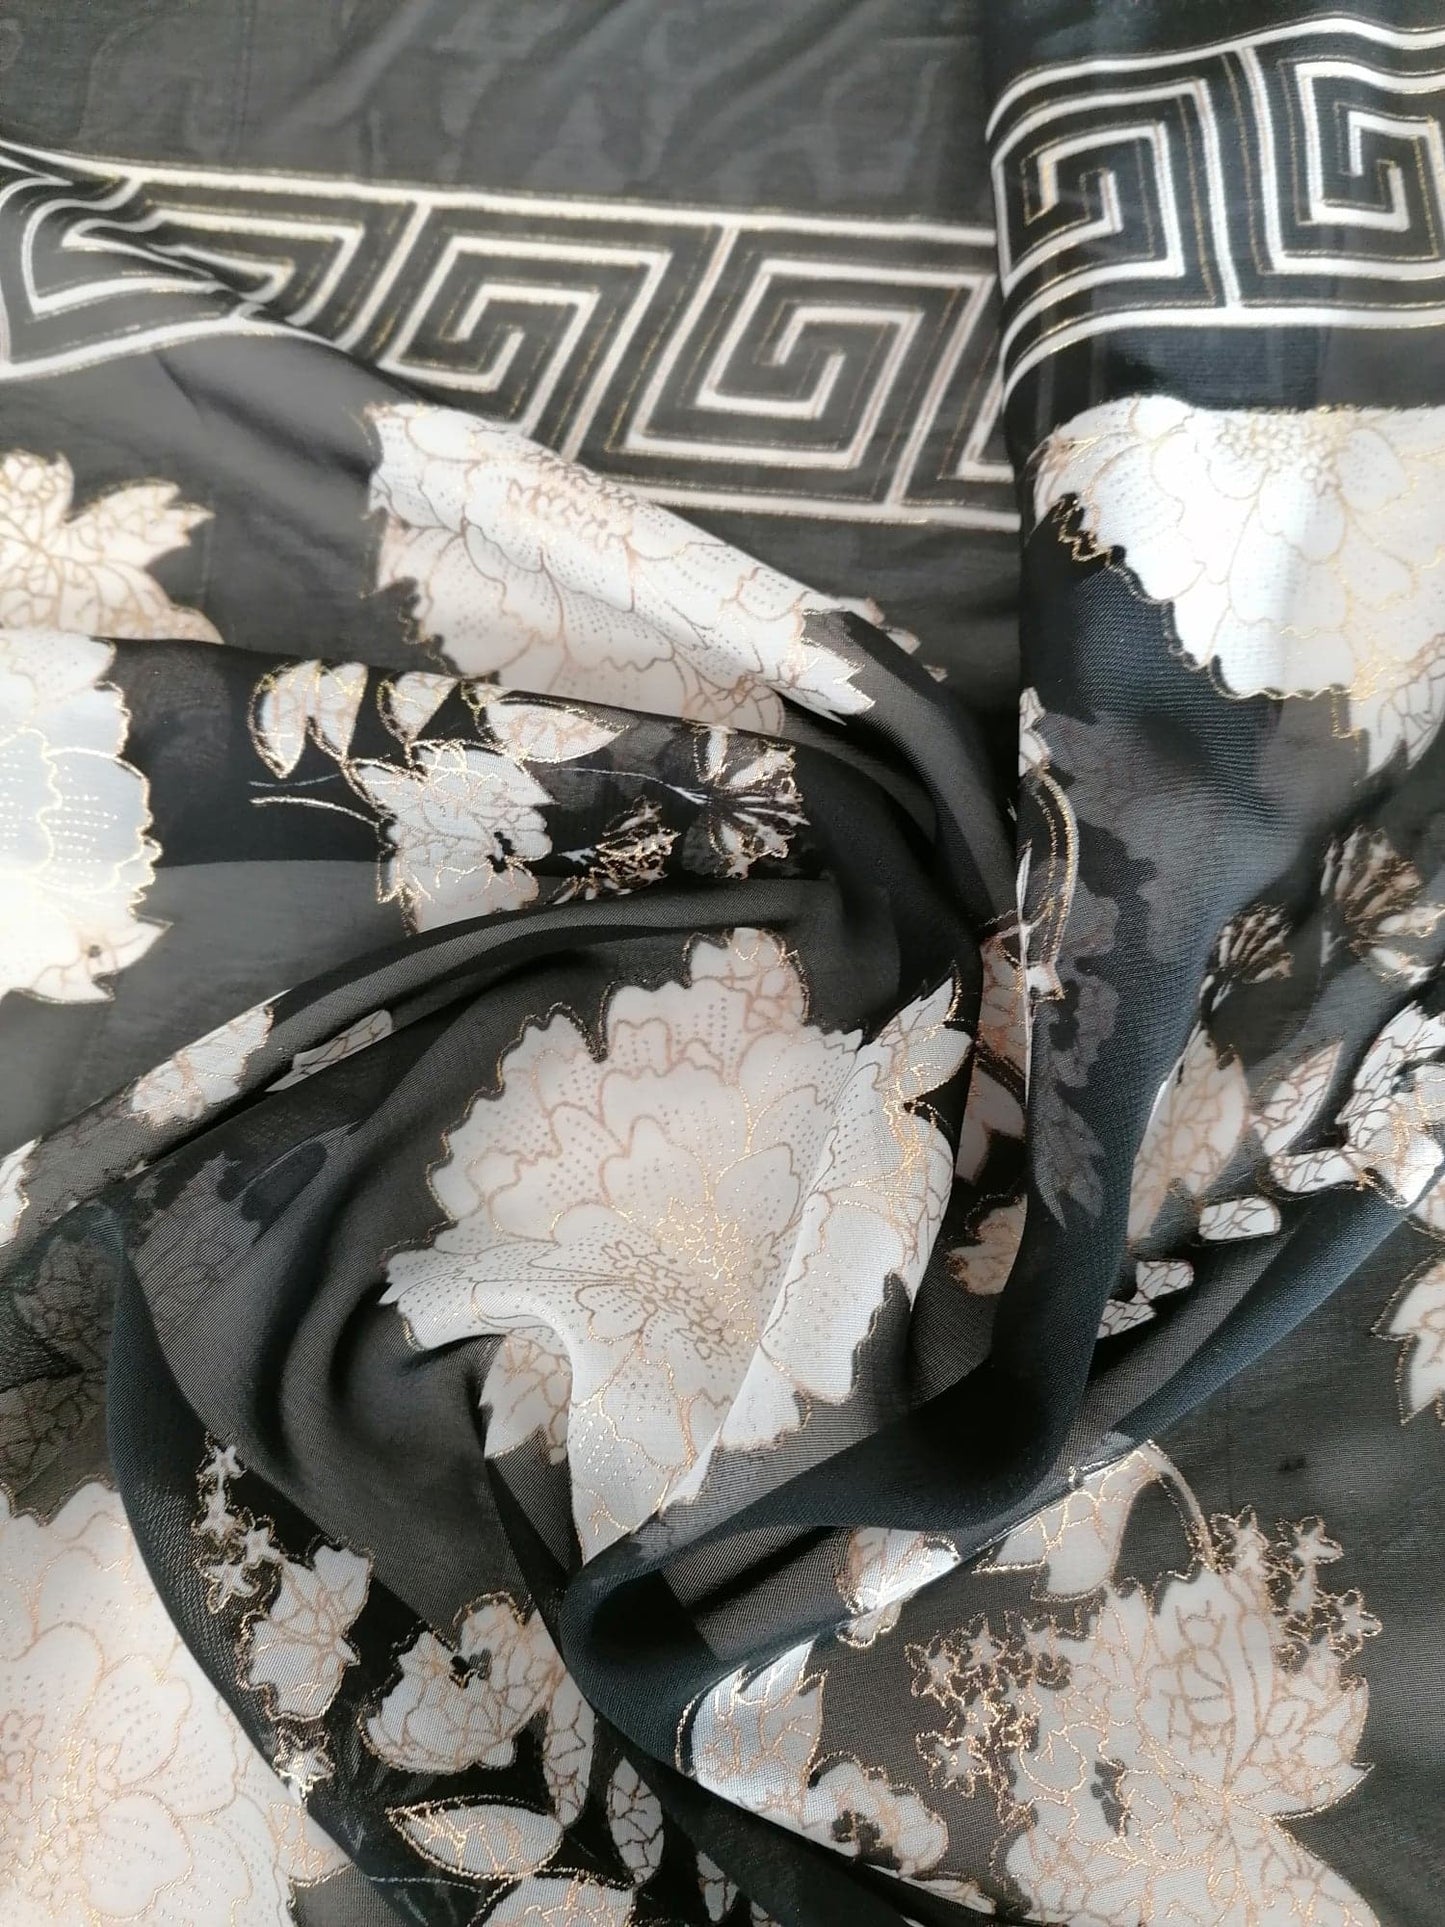 Chiffon Lurex Print - Double Border - Black/Cream/Gold - 56" Wide - Sold By the Metre